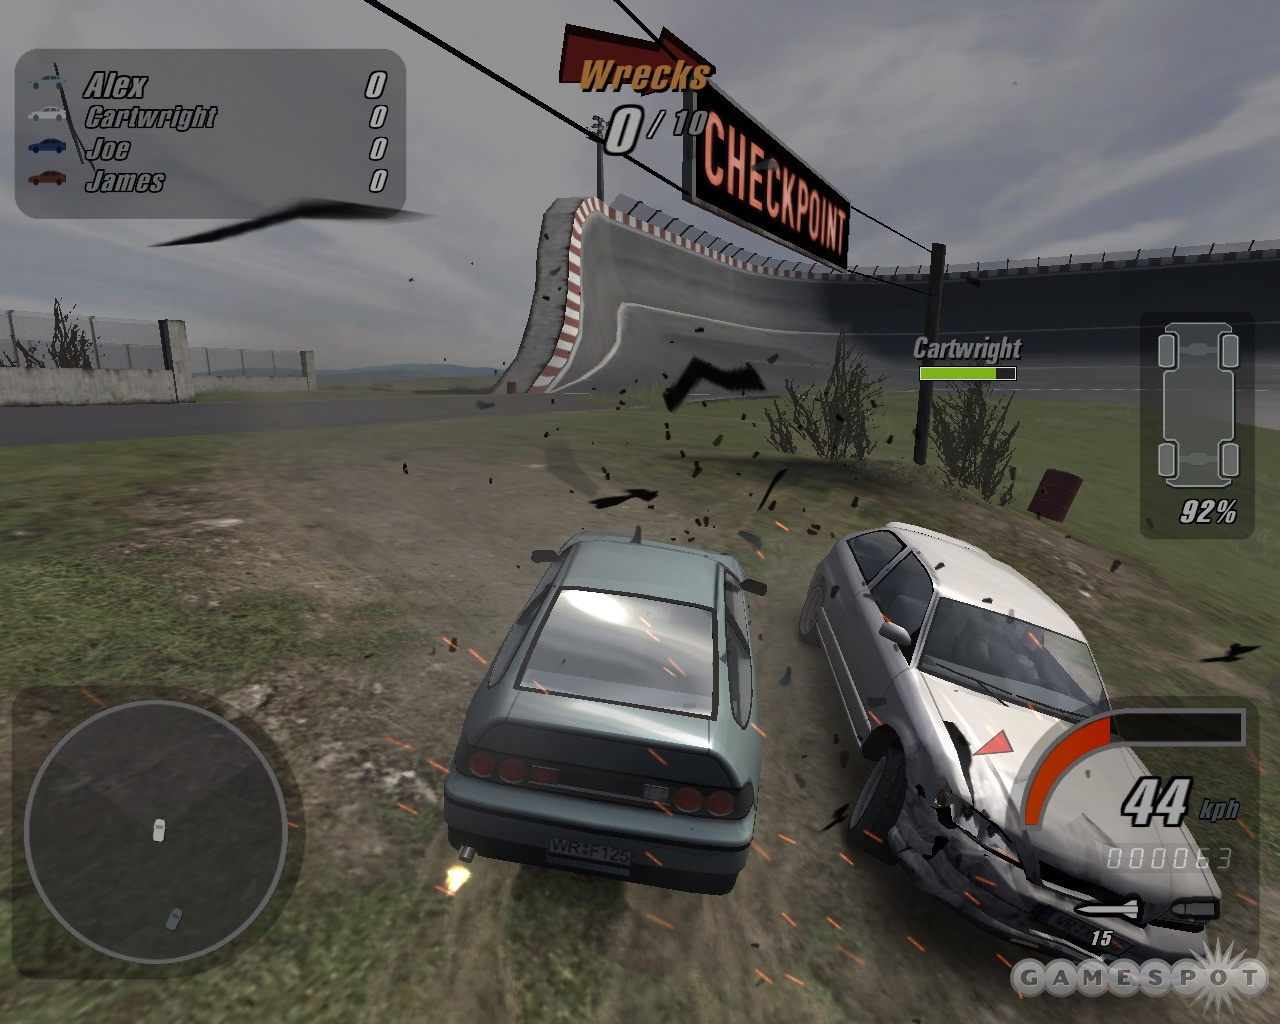 Crashing cars is mildly amusing, but racing is just no fun at all.